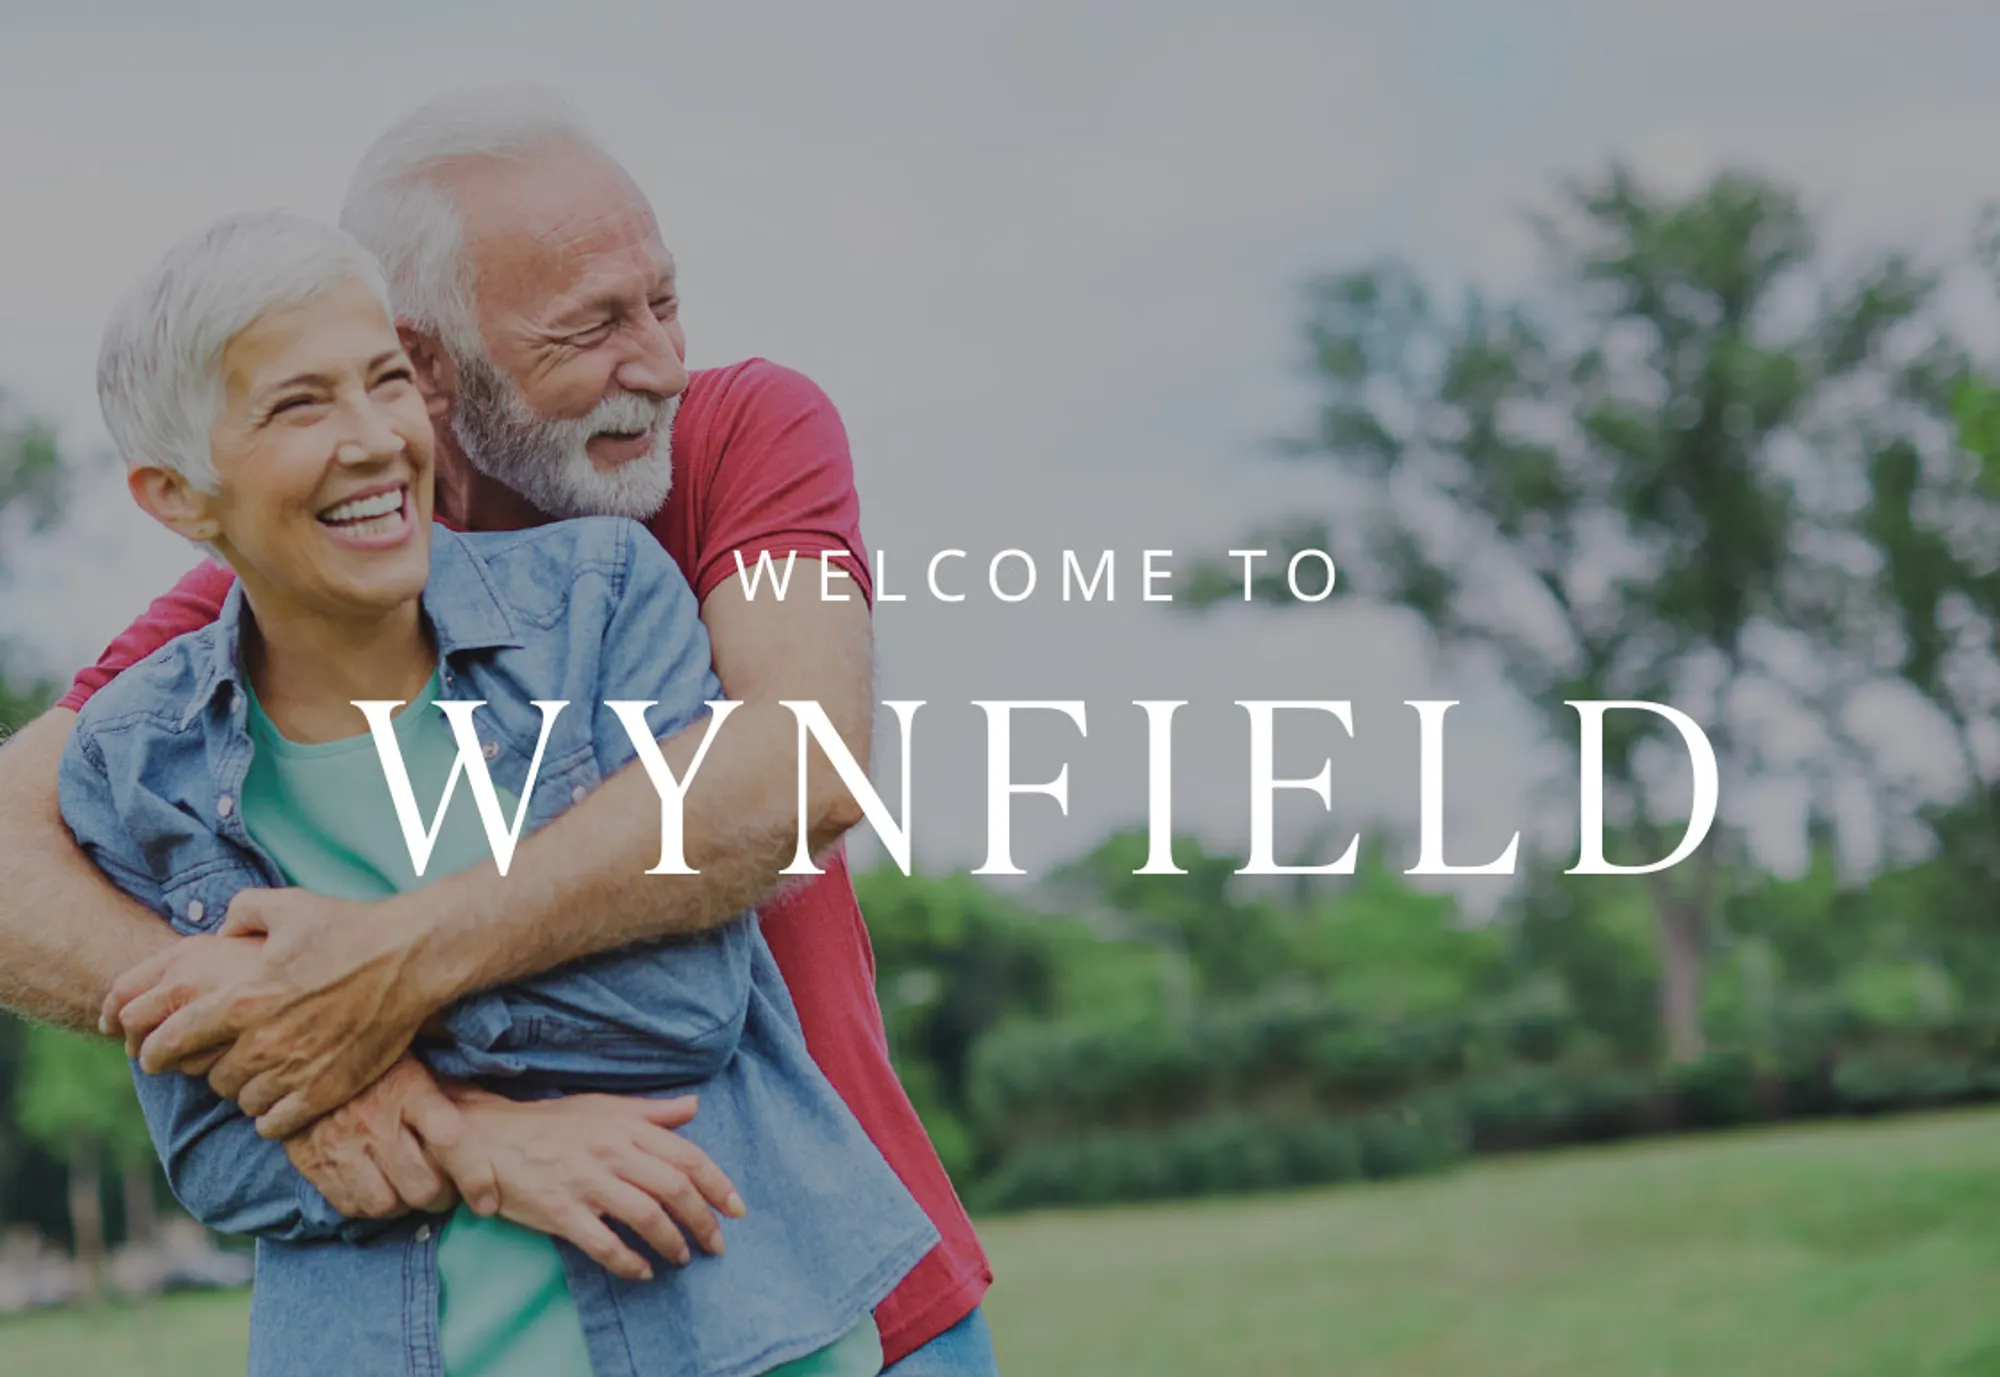 Two active adults hugging in a park with the words "Welcome to Wynfield" written in front of them